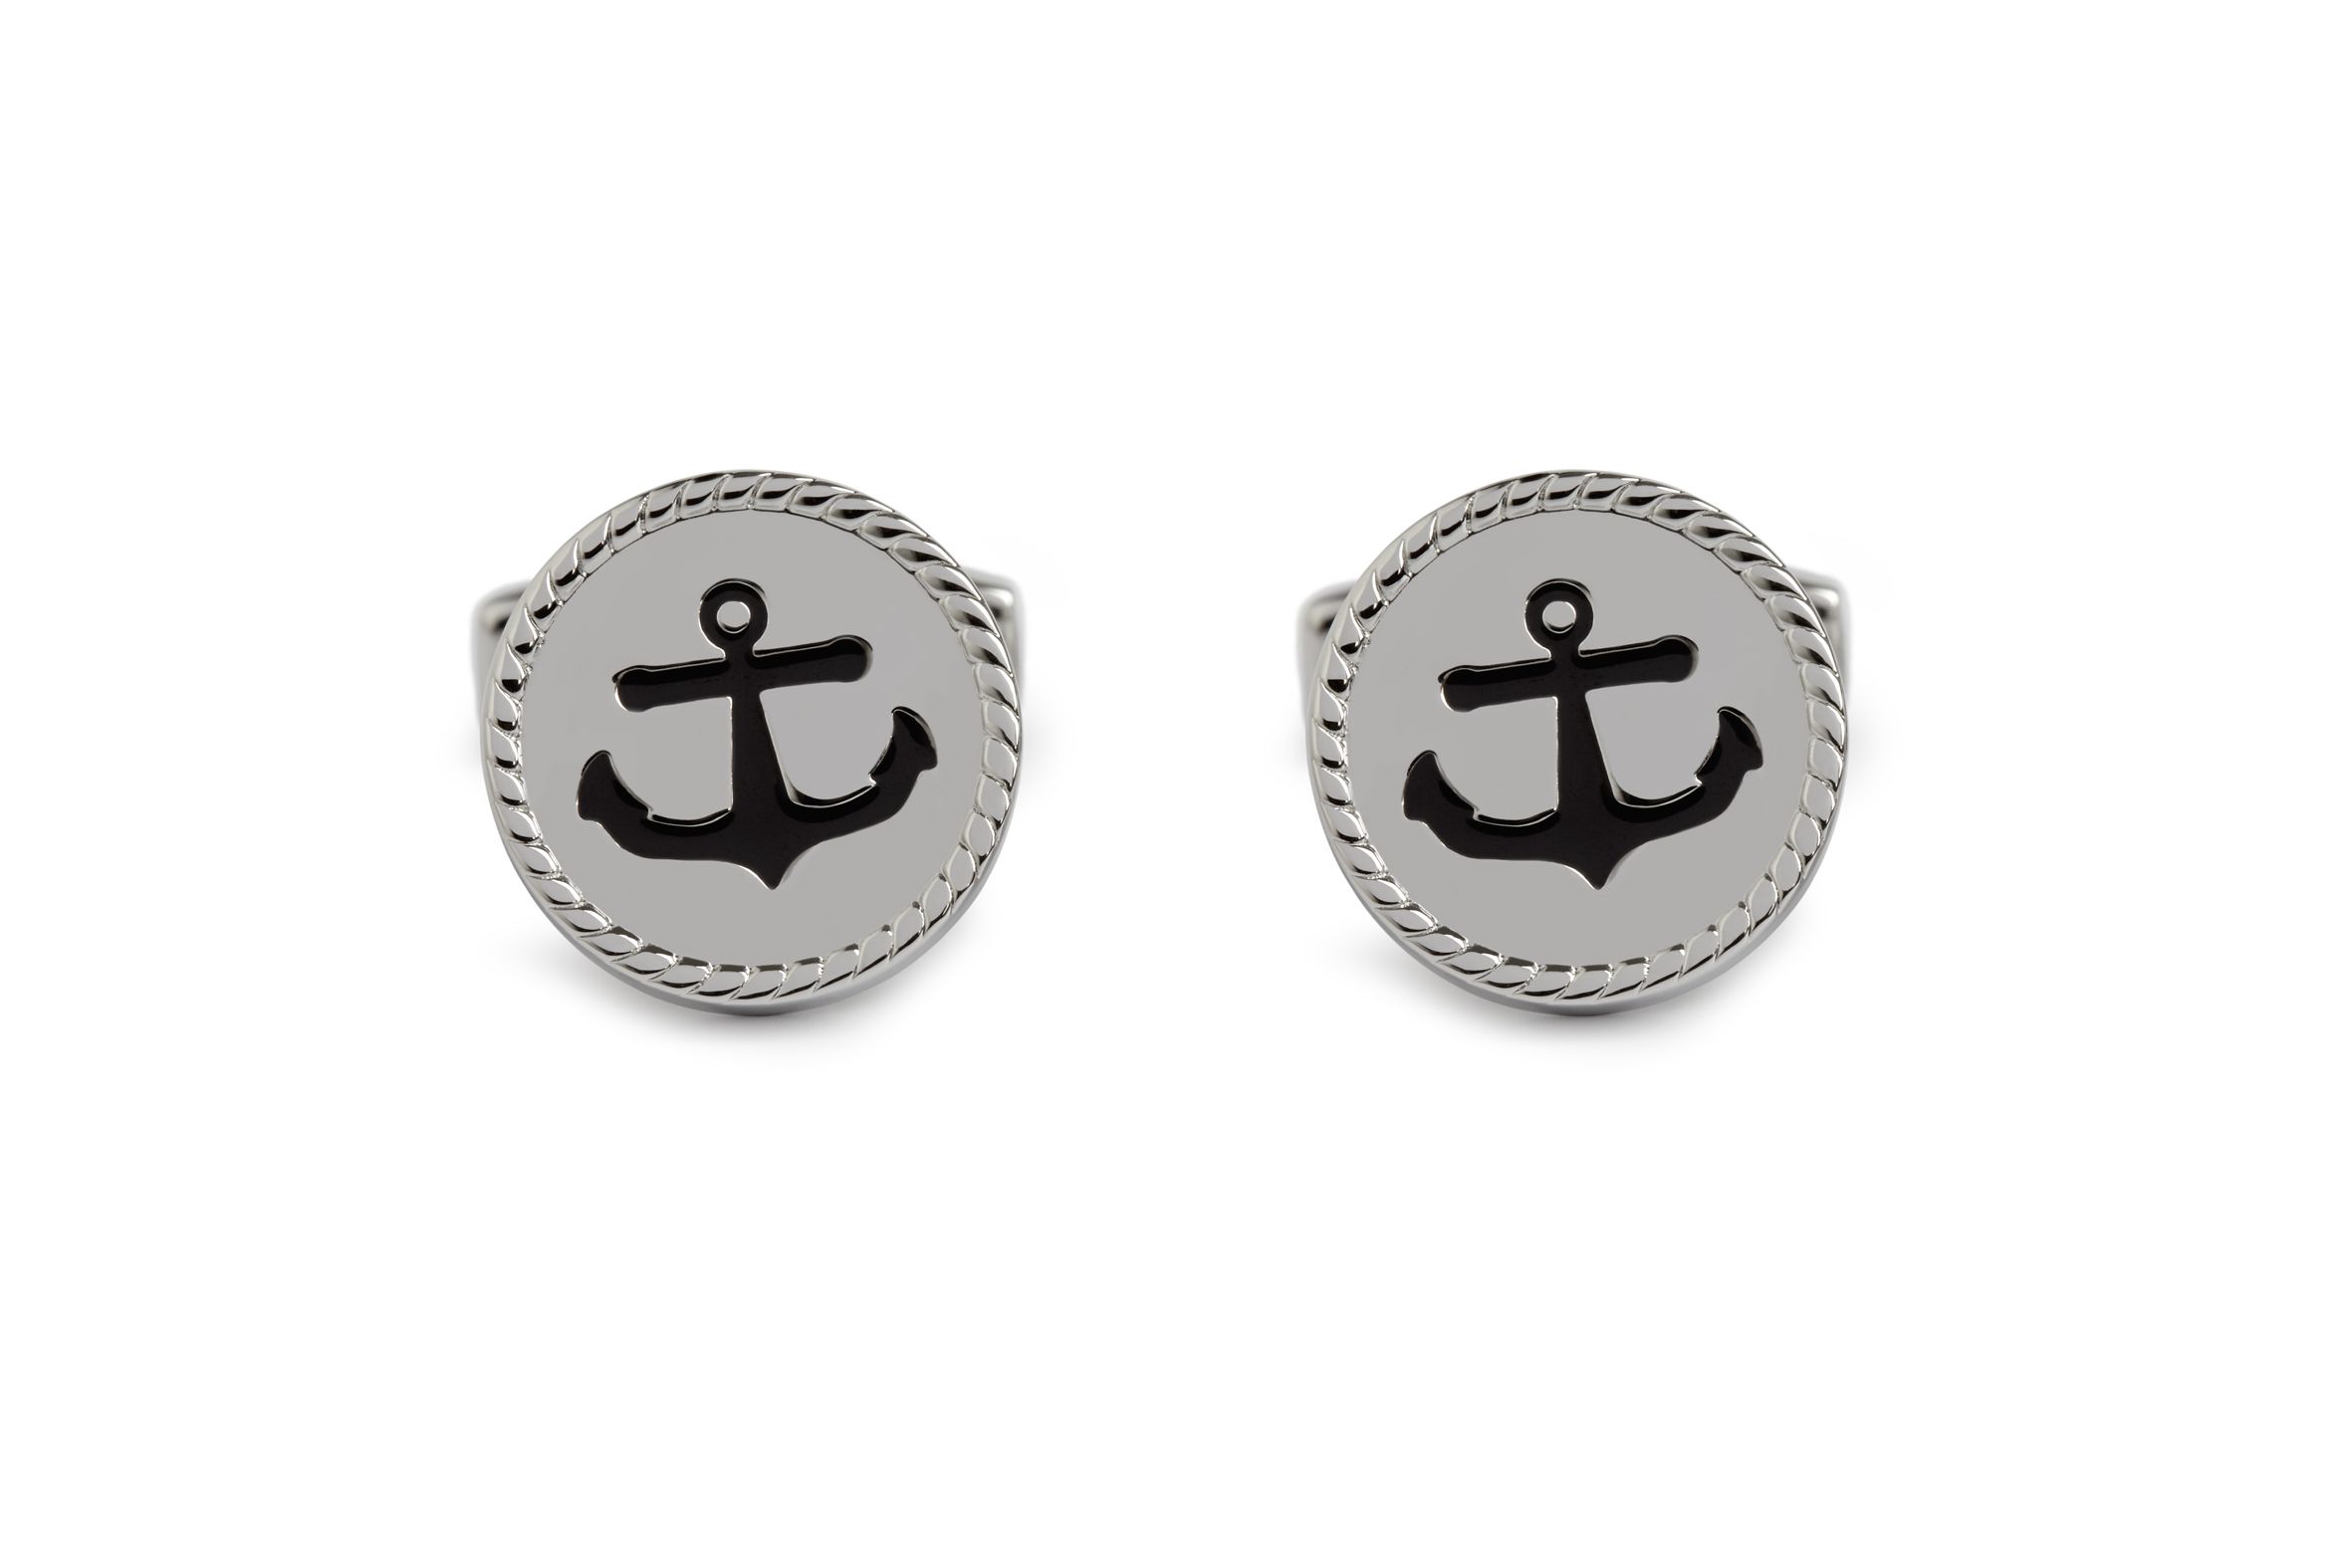 For all salty dogs abreast on the ocean waves, or those who remember the golf club blazer buttons of the 70s, a rhodium plated enamel infilled anchor design with twisted rope outer detailing.  Toggle back